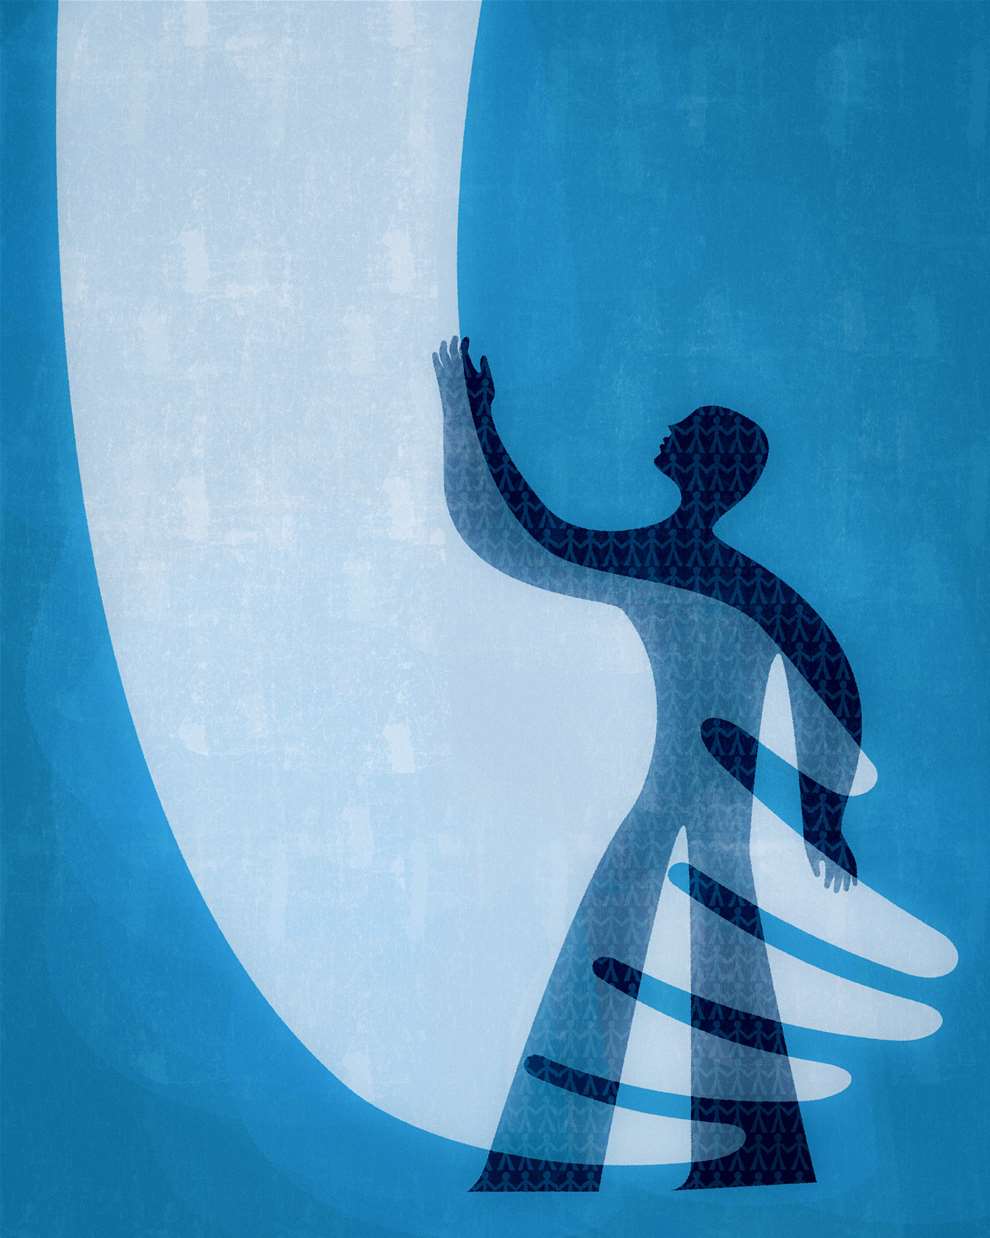 Paul Wearing, Digital textural illustration of a large hand holding a smaller figure on blue background. 